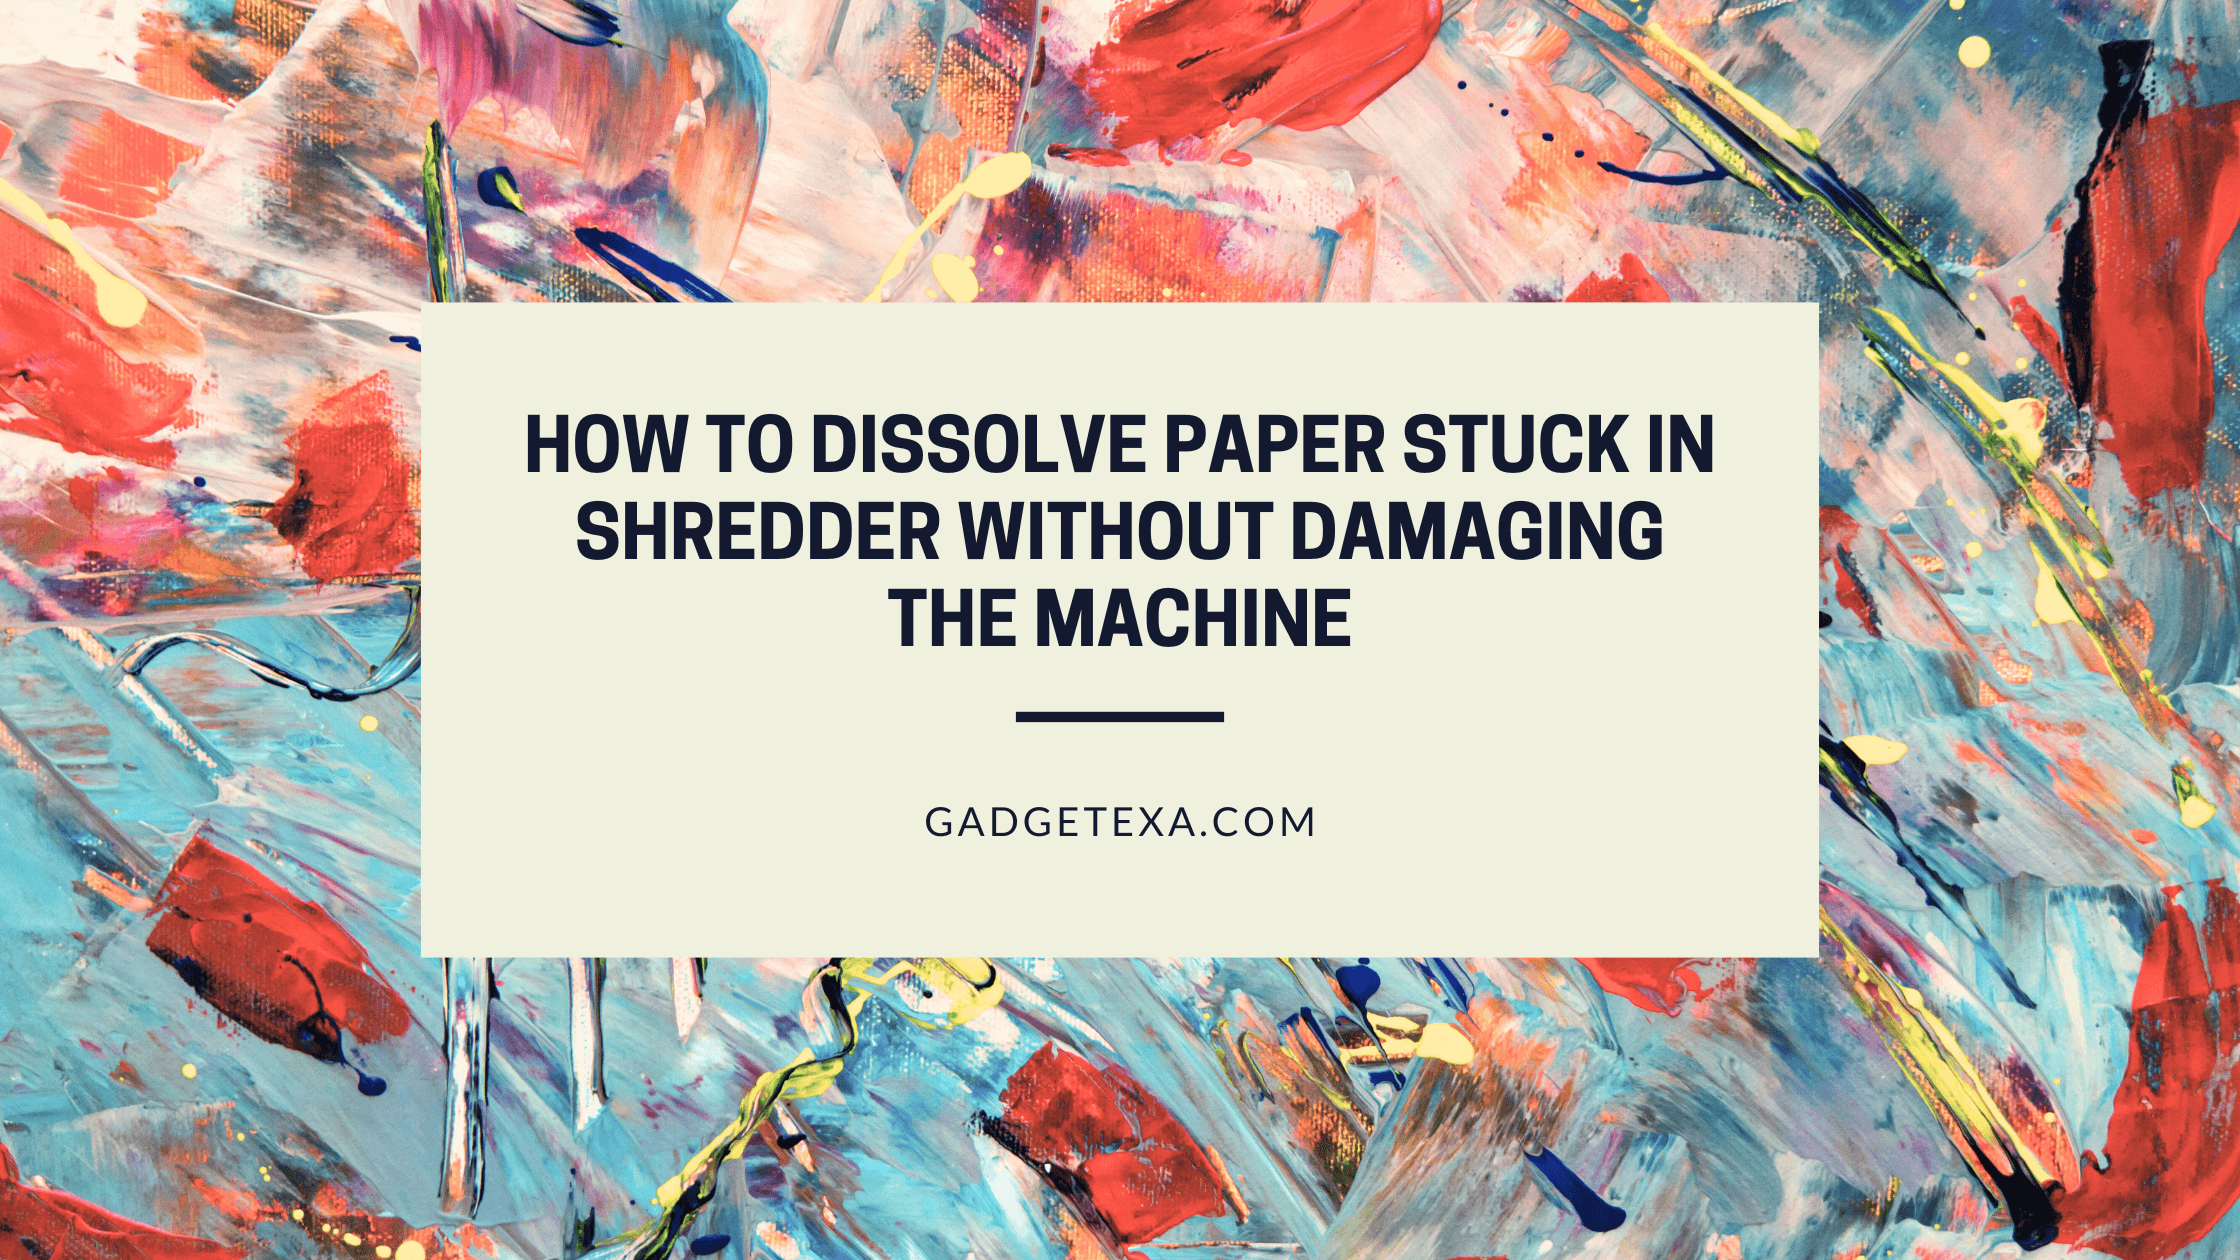 You are currently viewing How to Dissolve Paper Stuck in Shredder Without Damaging the Machine